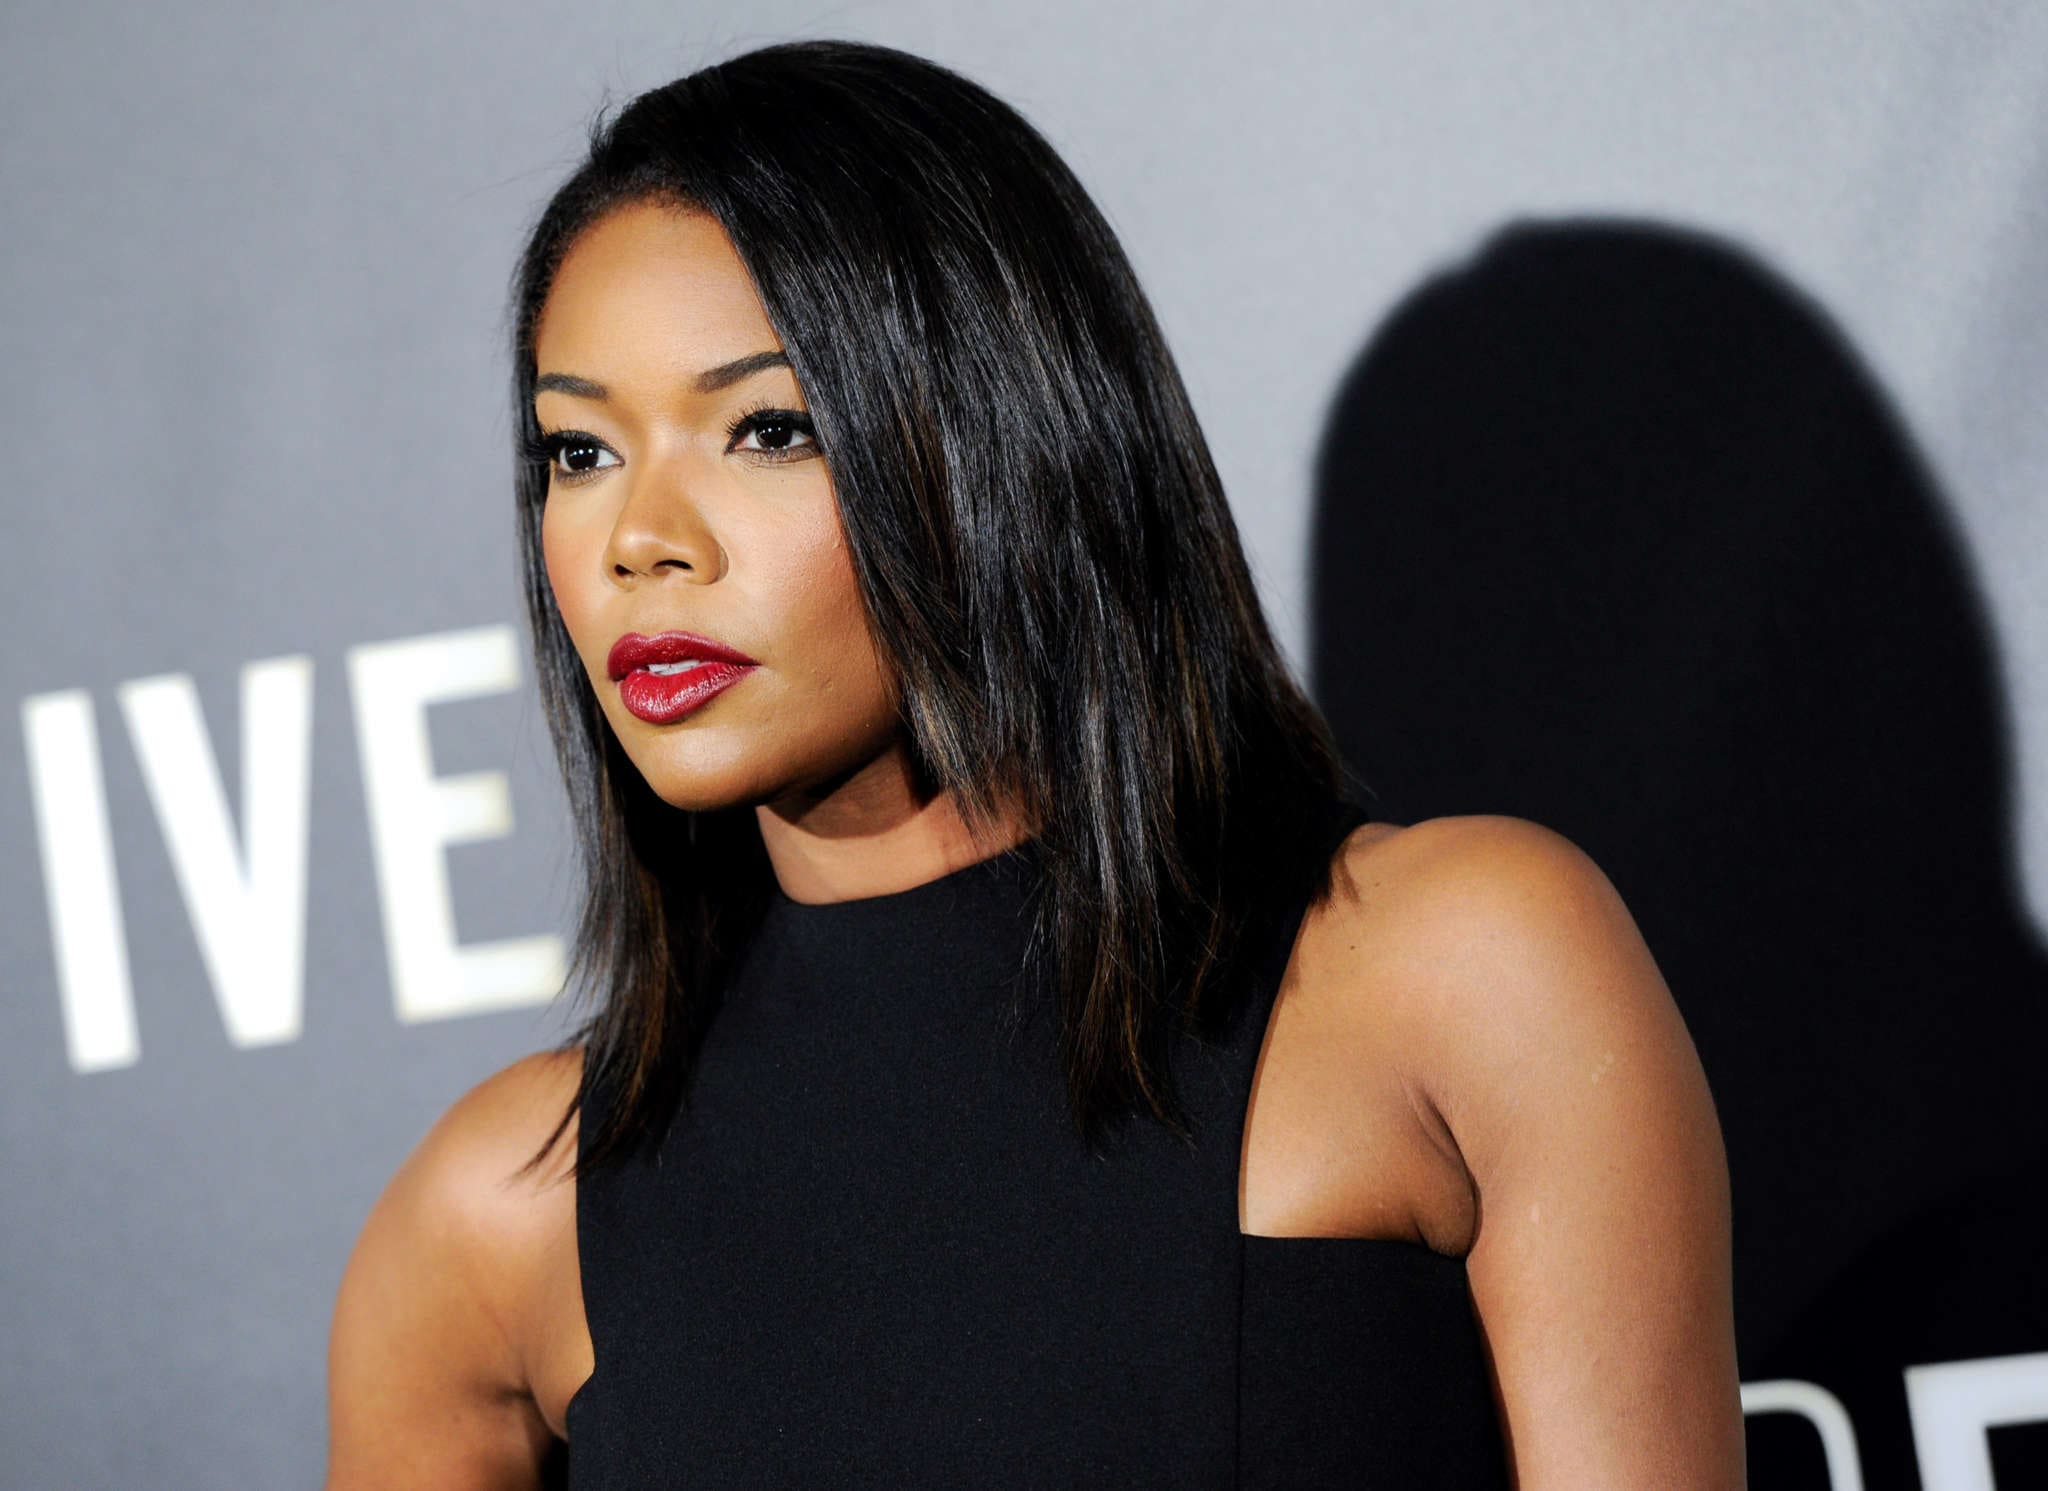 Gabrielle Union Looks Gorgeous In A Red Outfit - Check Out Her Photos